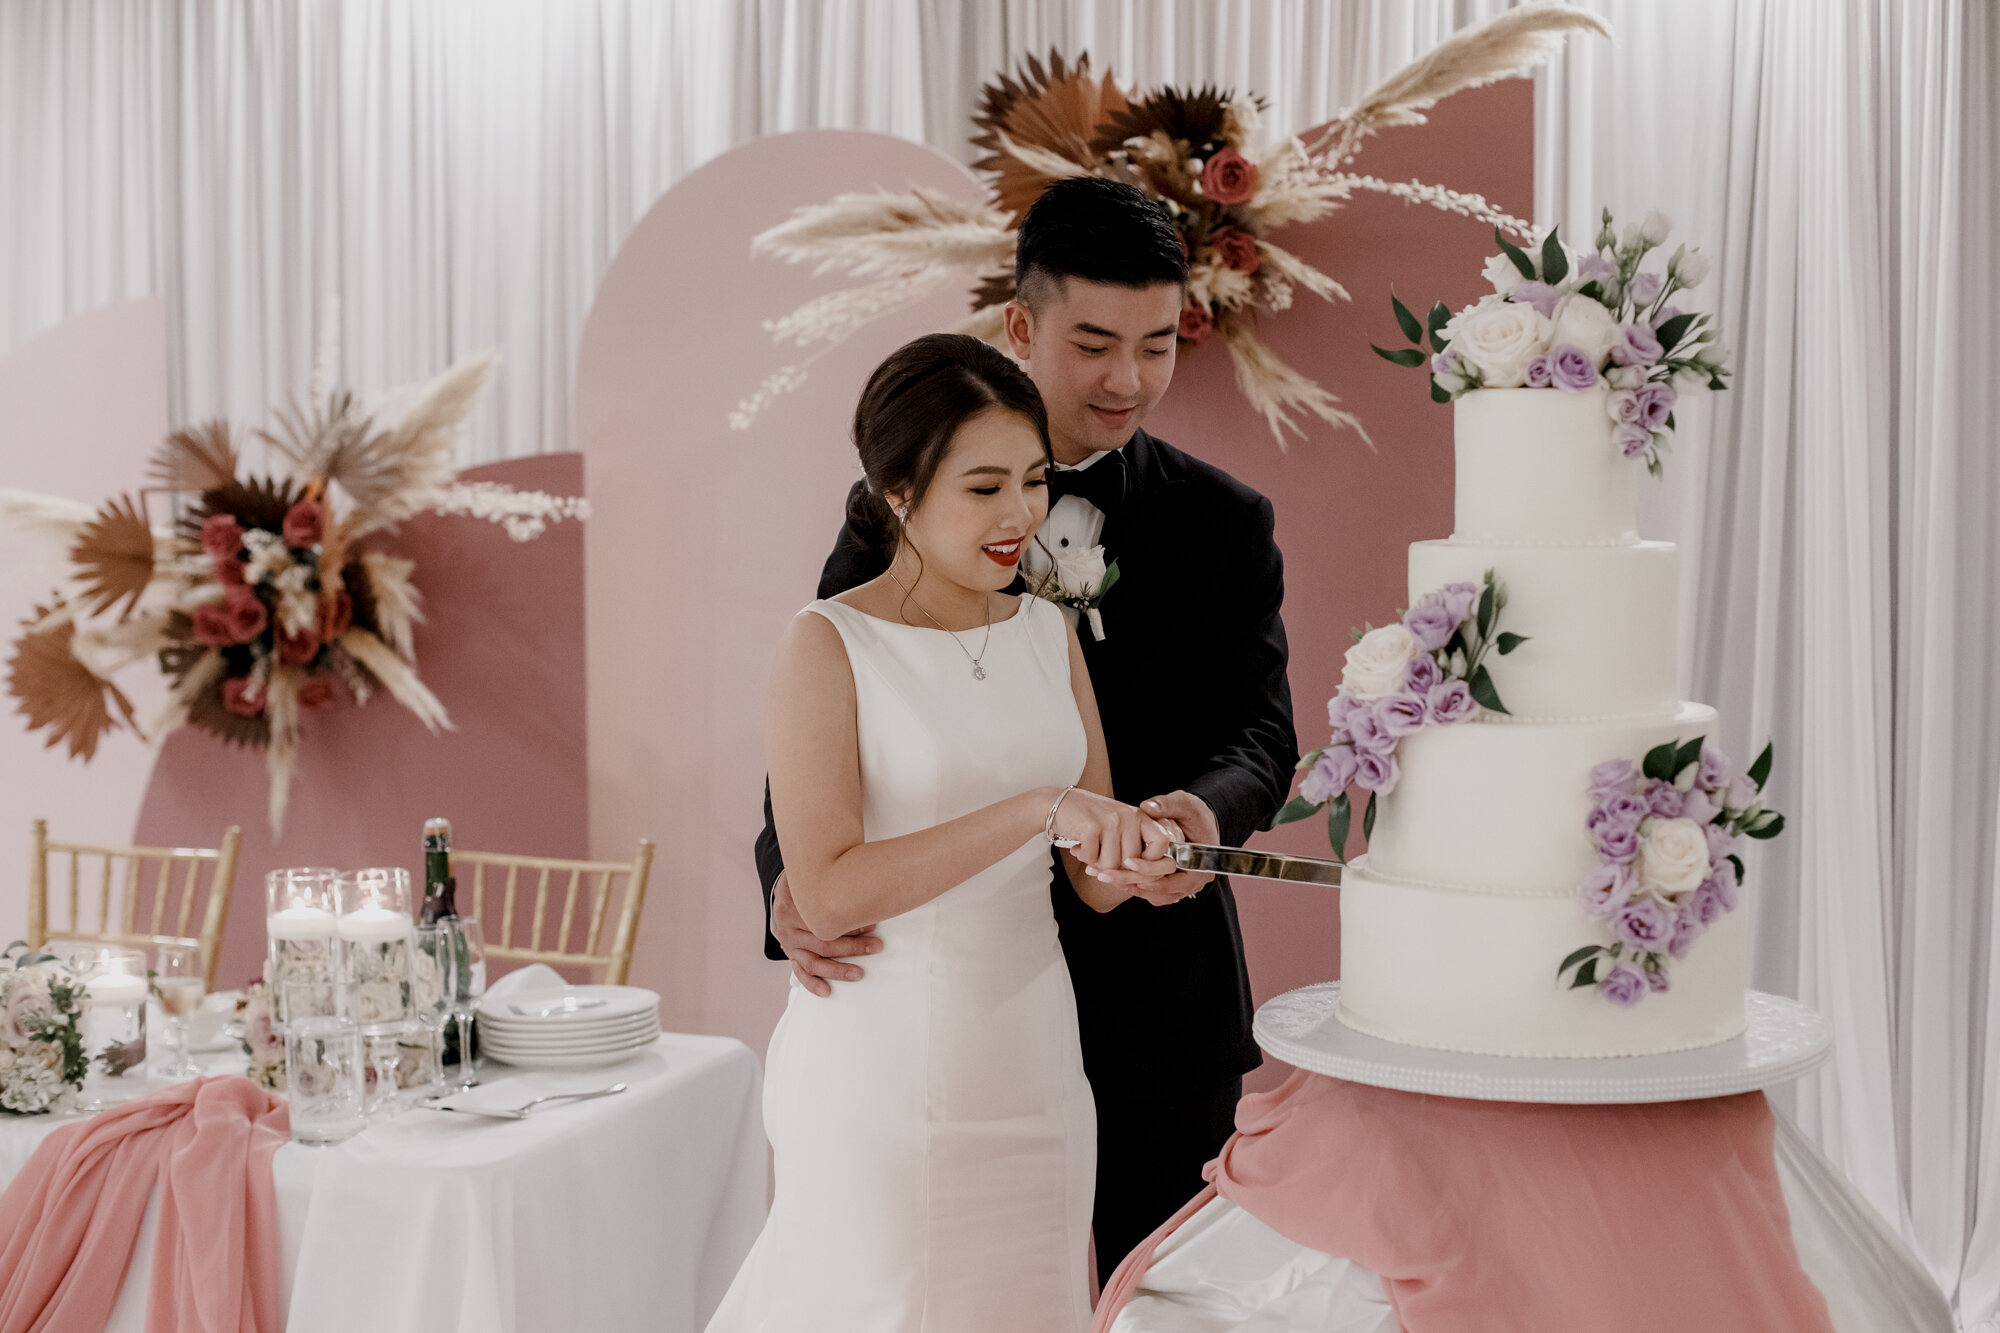 Bride and groom cutting the cake. Urban Elegant East Asian Wedding at Chateau De L’Amour